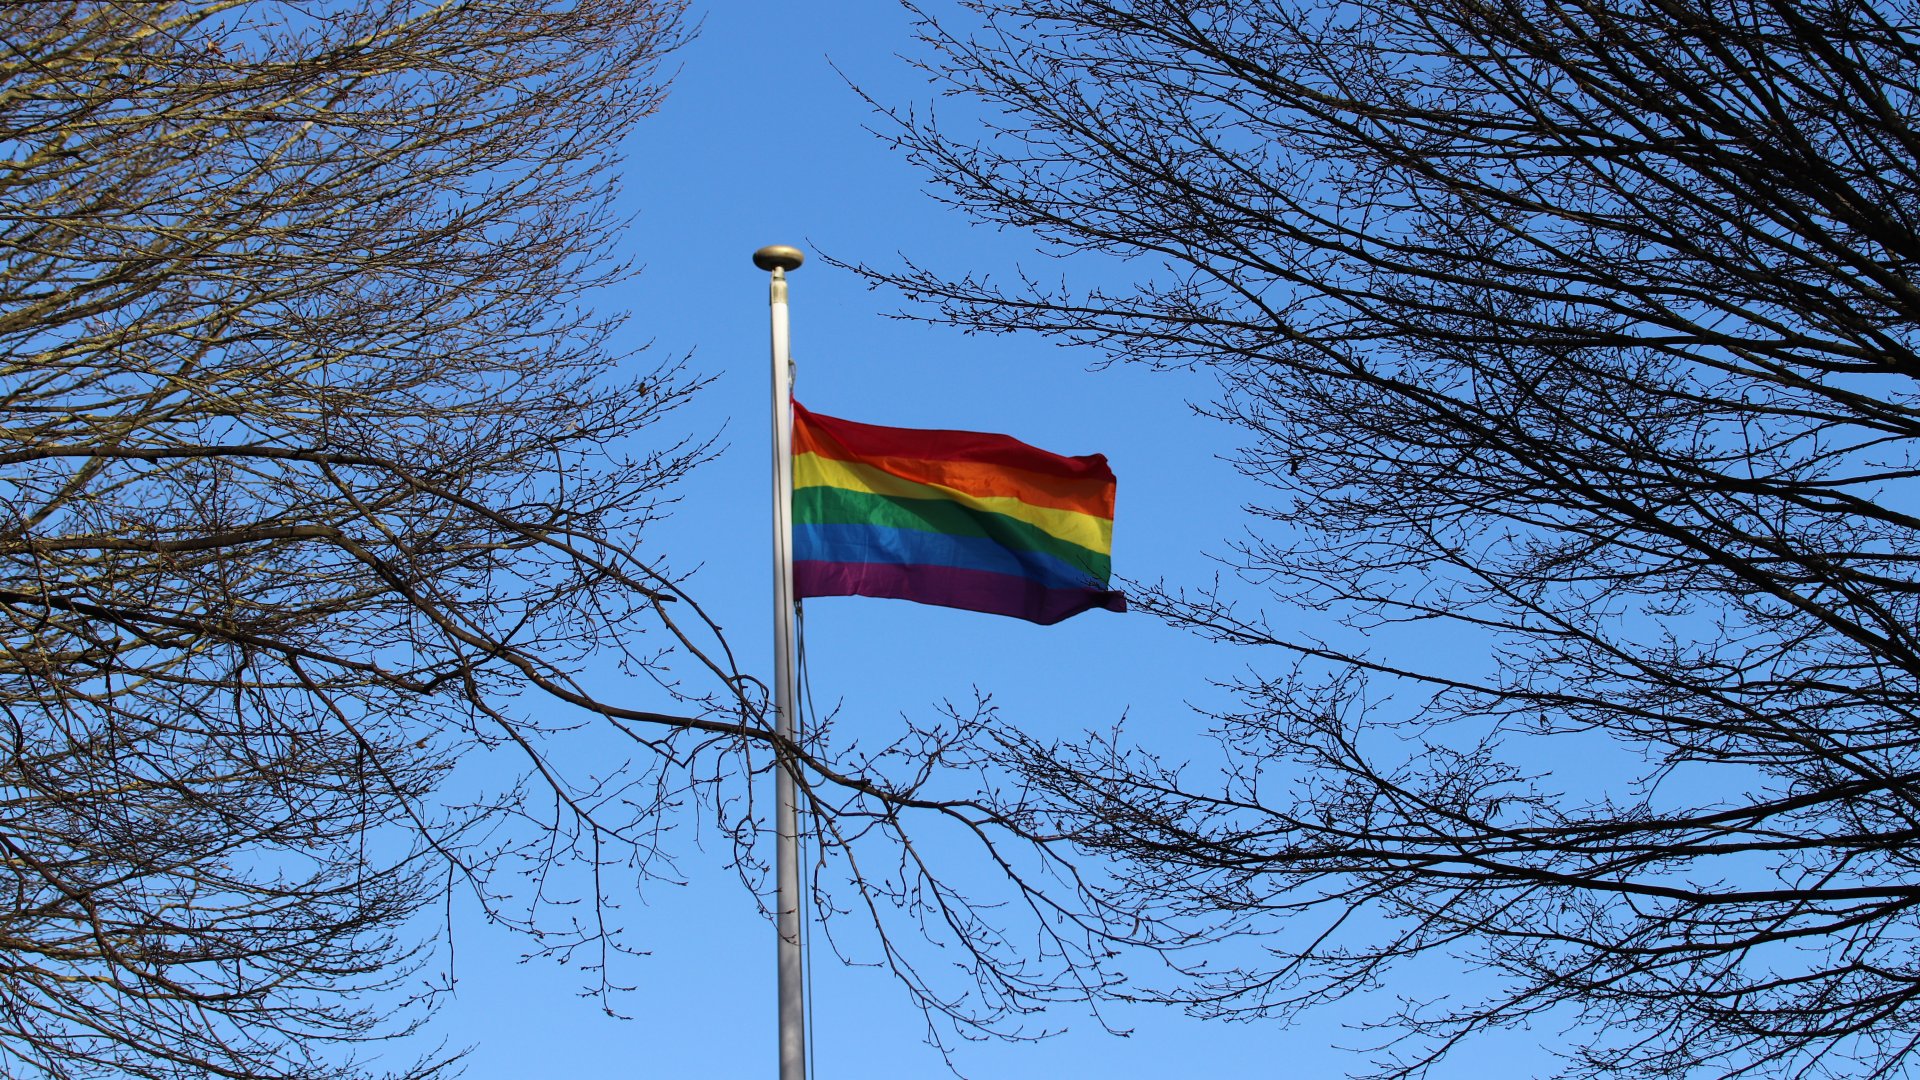 The Pride flag flies over Wolfson College